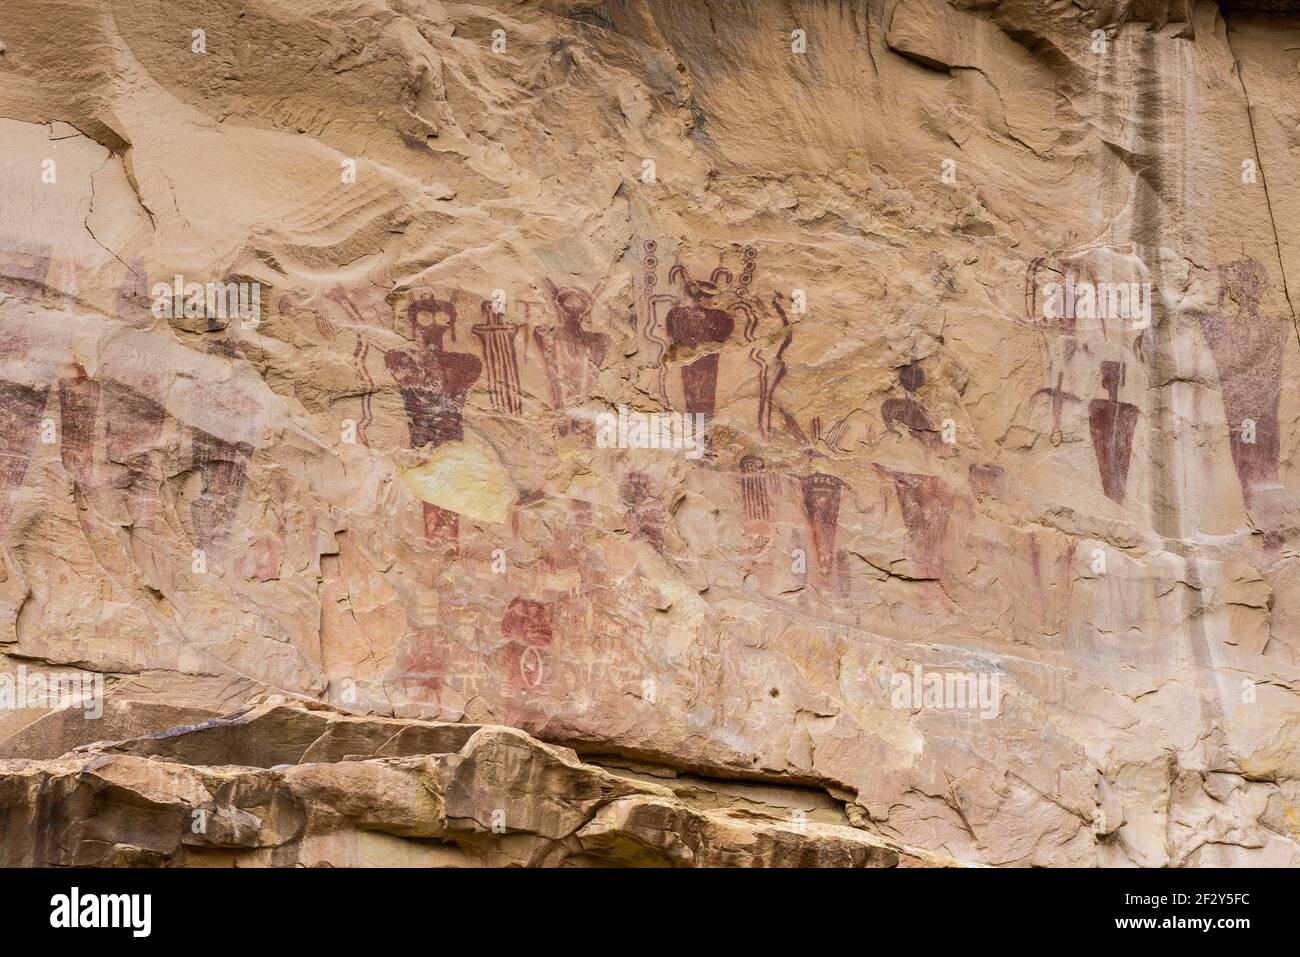 Large panel of Barrier Canyon style pictographs created by Native American peoples during the archaic period 1,500 to 4,000 year ago, Sego Canyon, USA Stock Photo